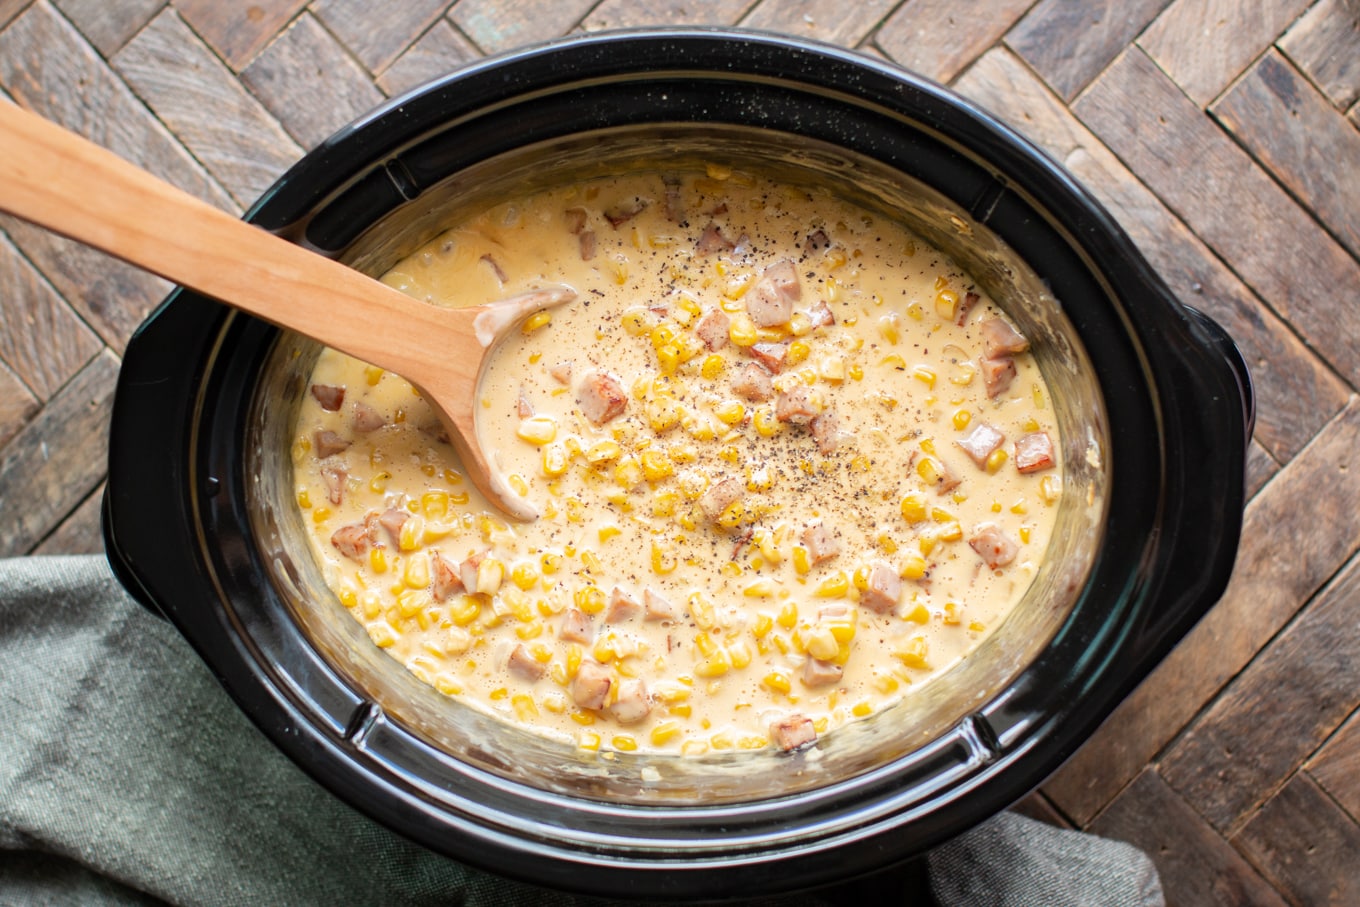 corn in a cheesy sauce with black pepper on top.